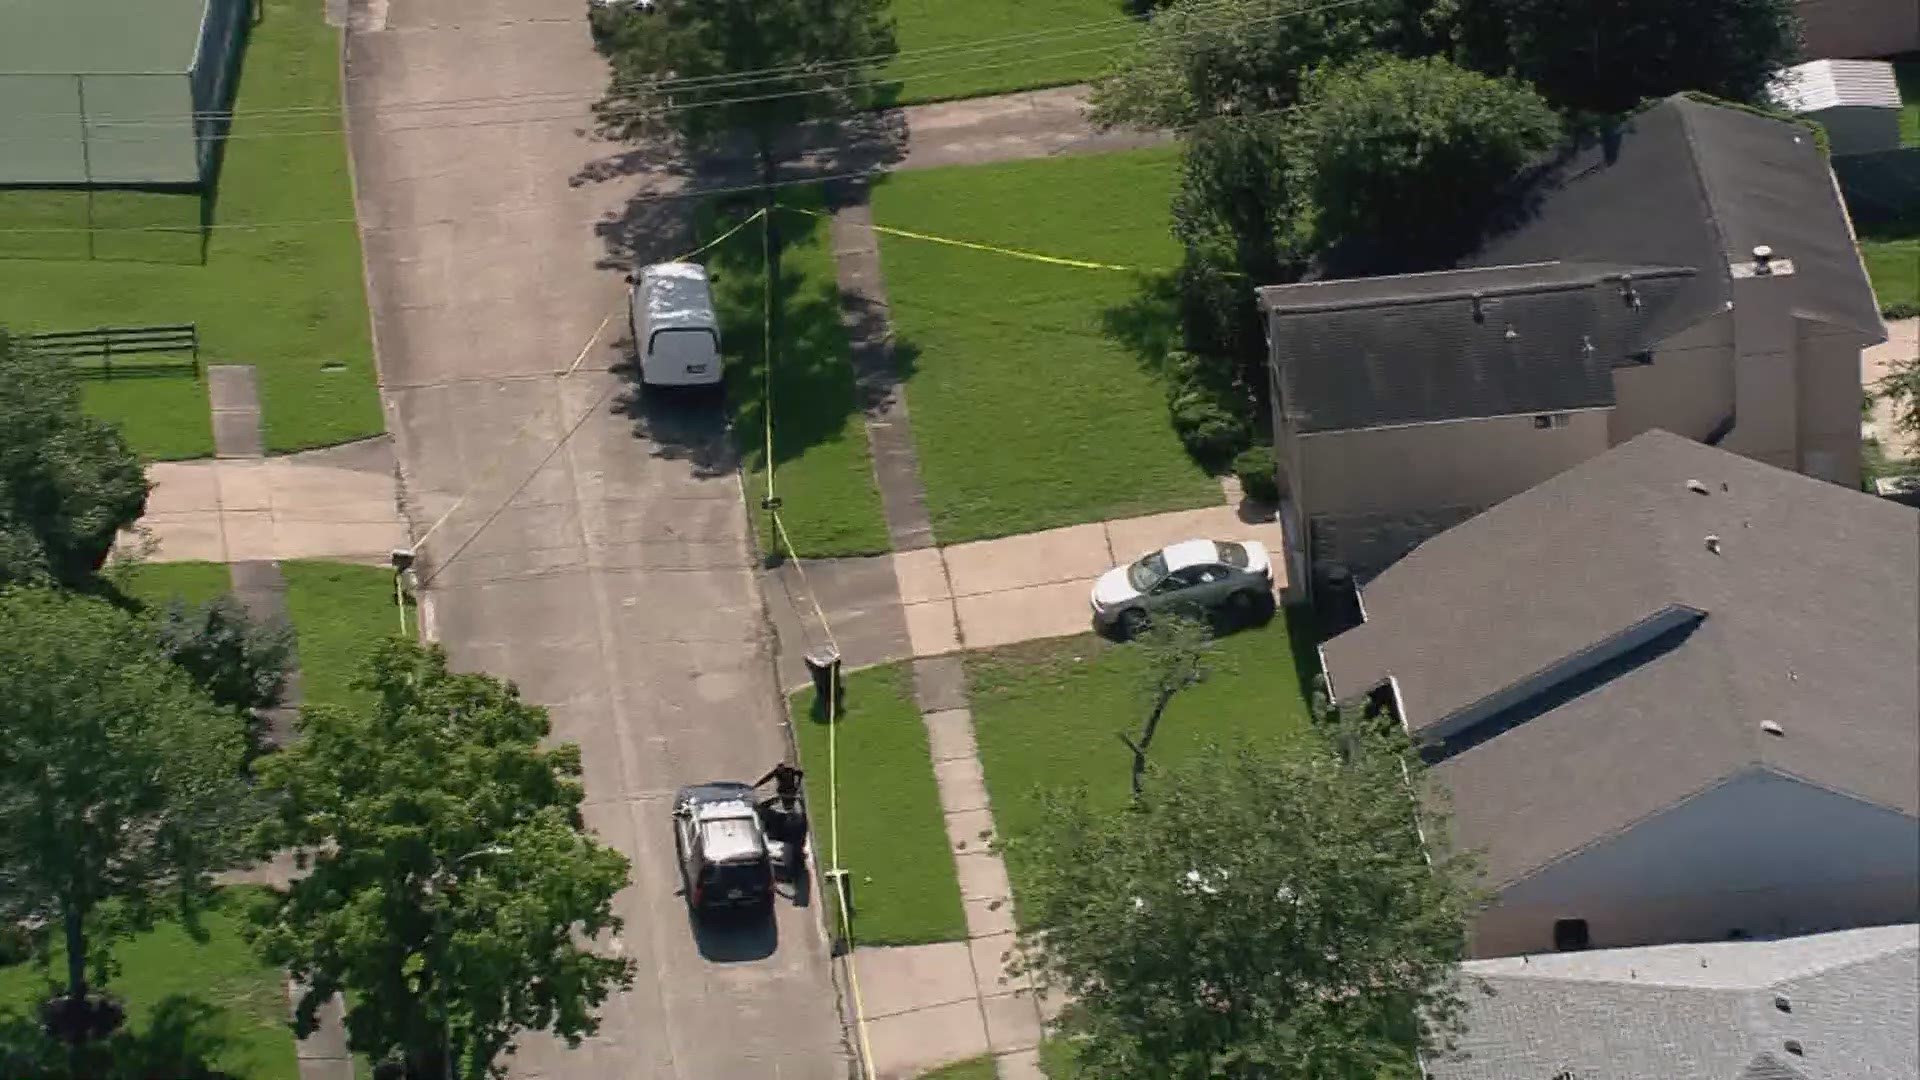 Houston police said a woman was stabbed to death at a home in Missouri City. Police